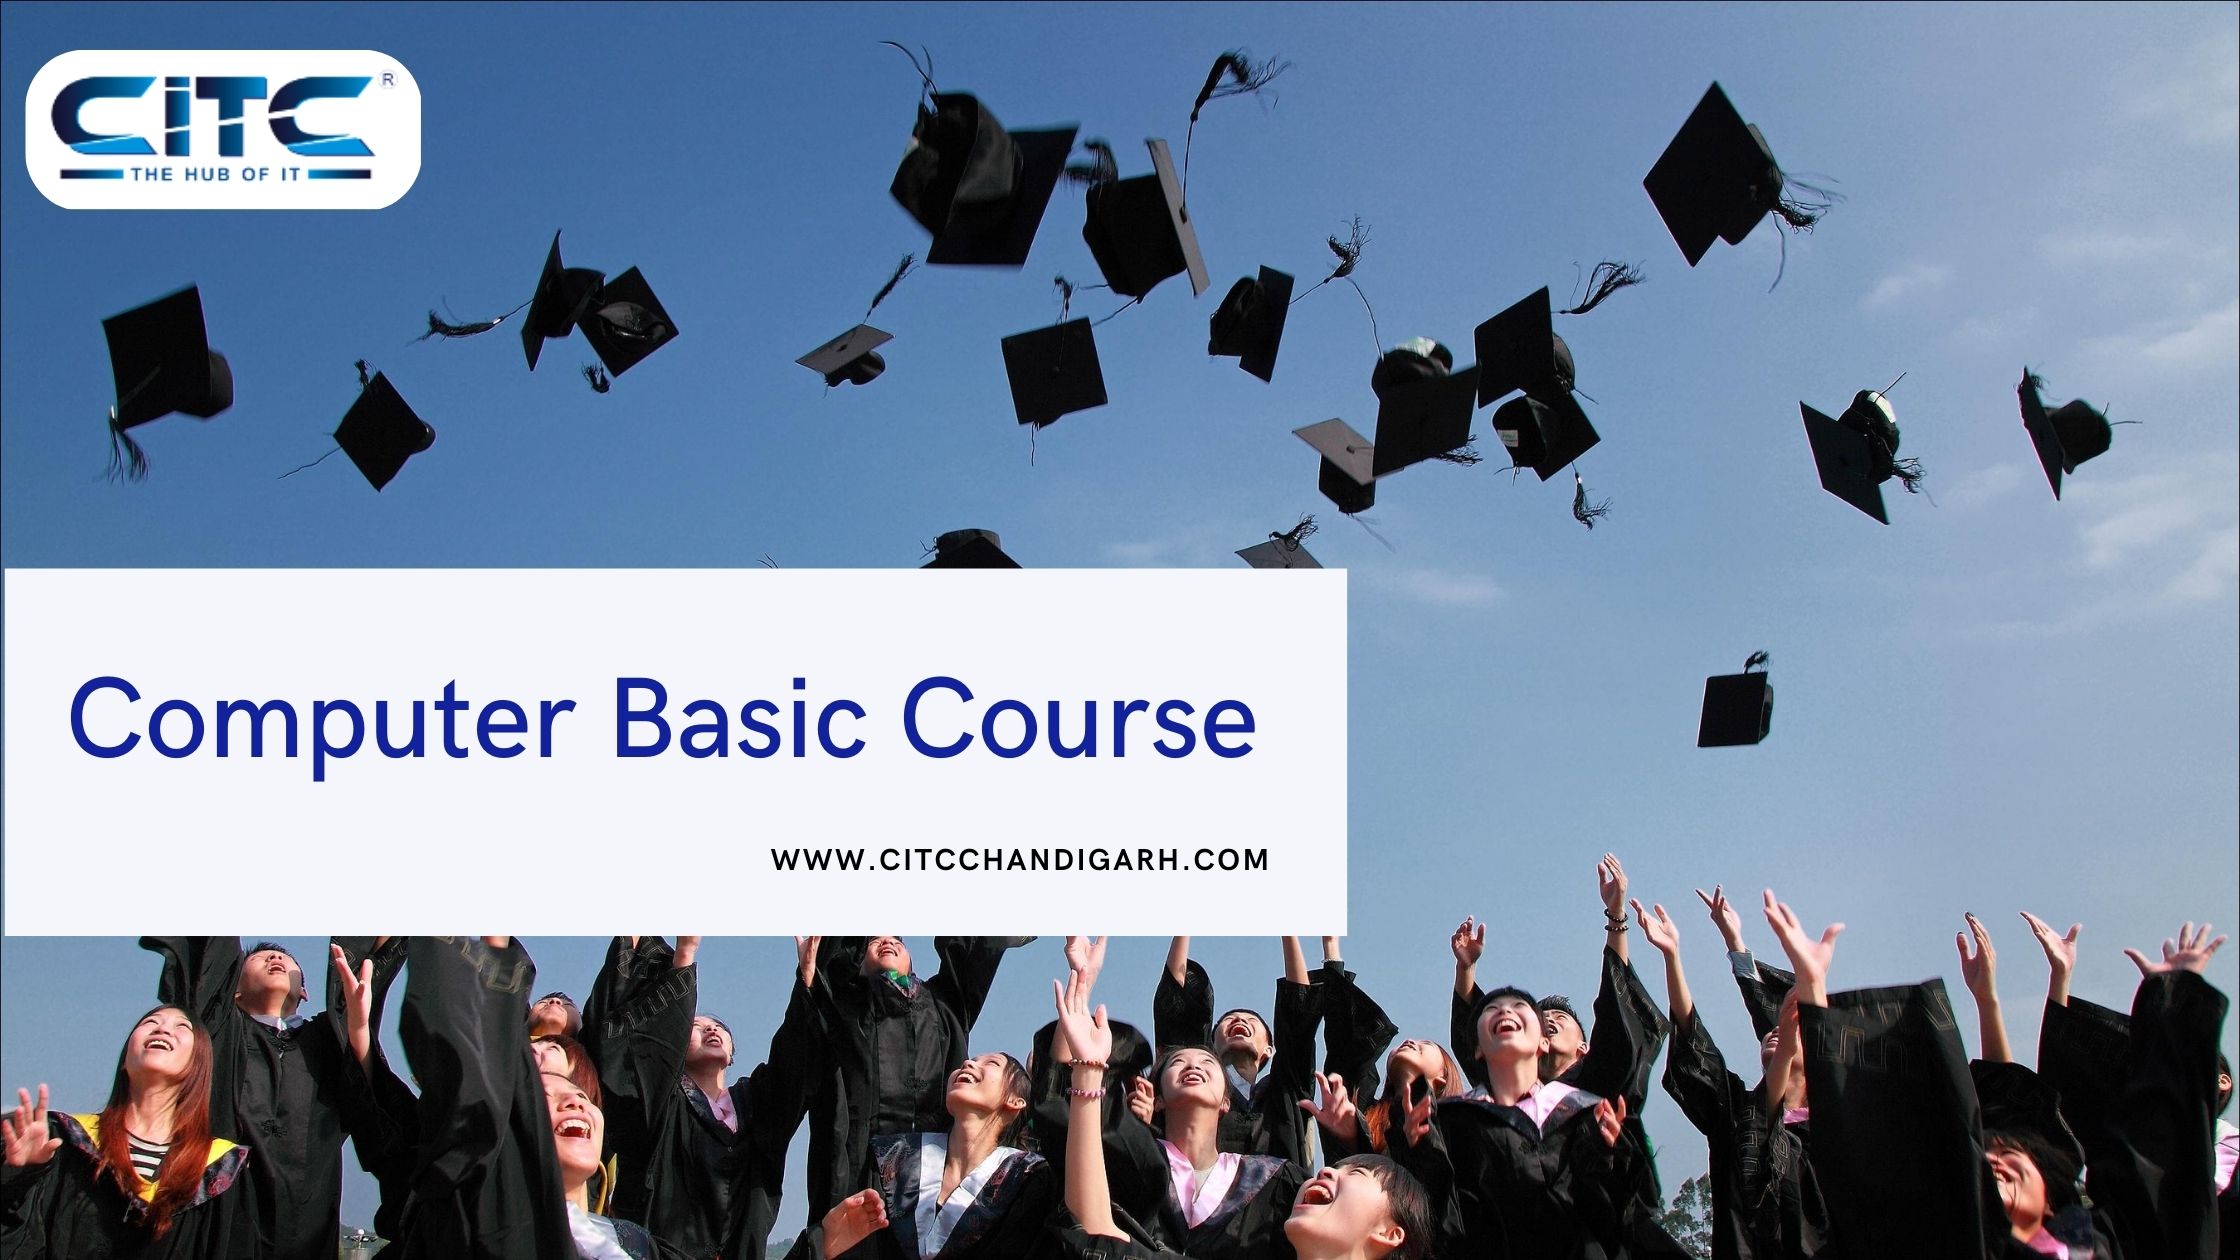 Certification Course in Computer Basics with CITC